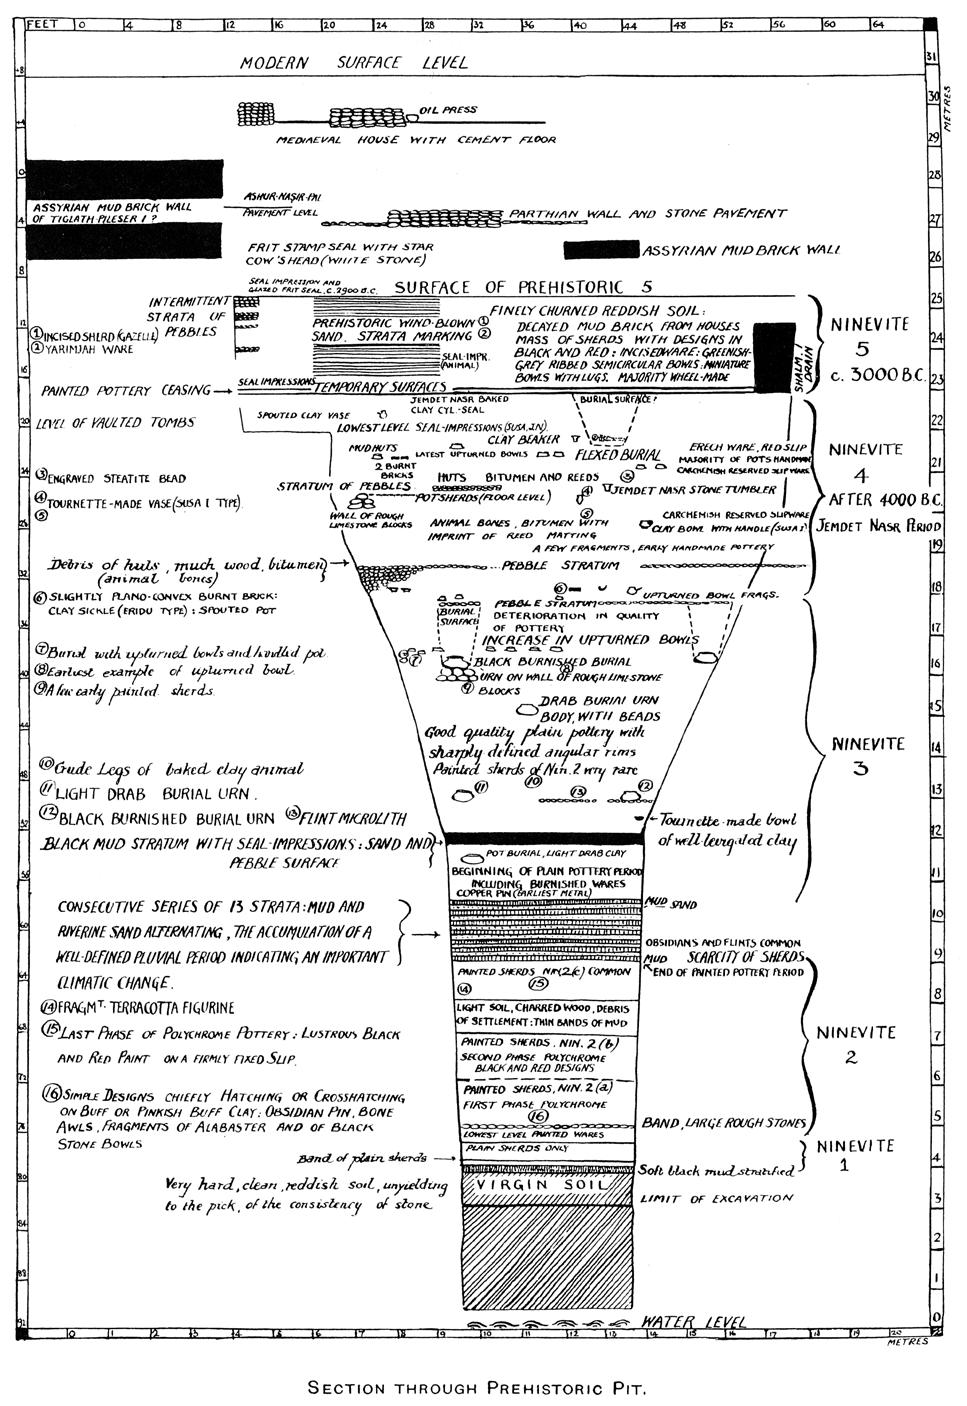 Figure 21.1 Schematic stratigraphic profile of the Prehistoric Pit. Reproduced from Thompson & Mallowan 1933, Tf. 73.